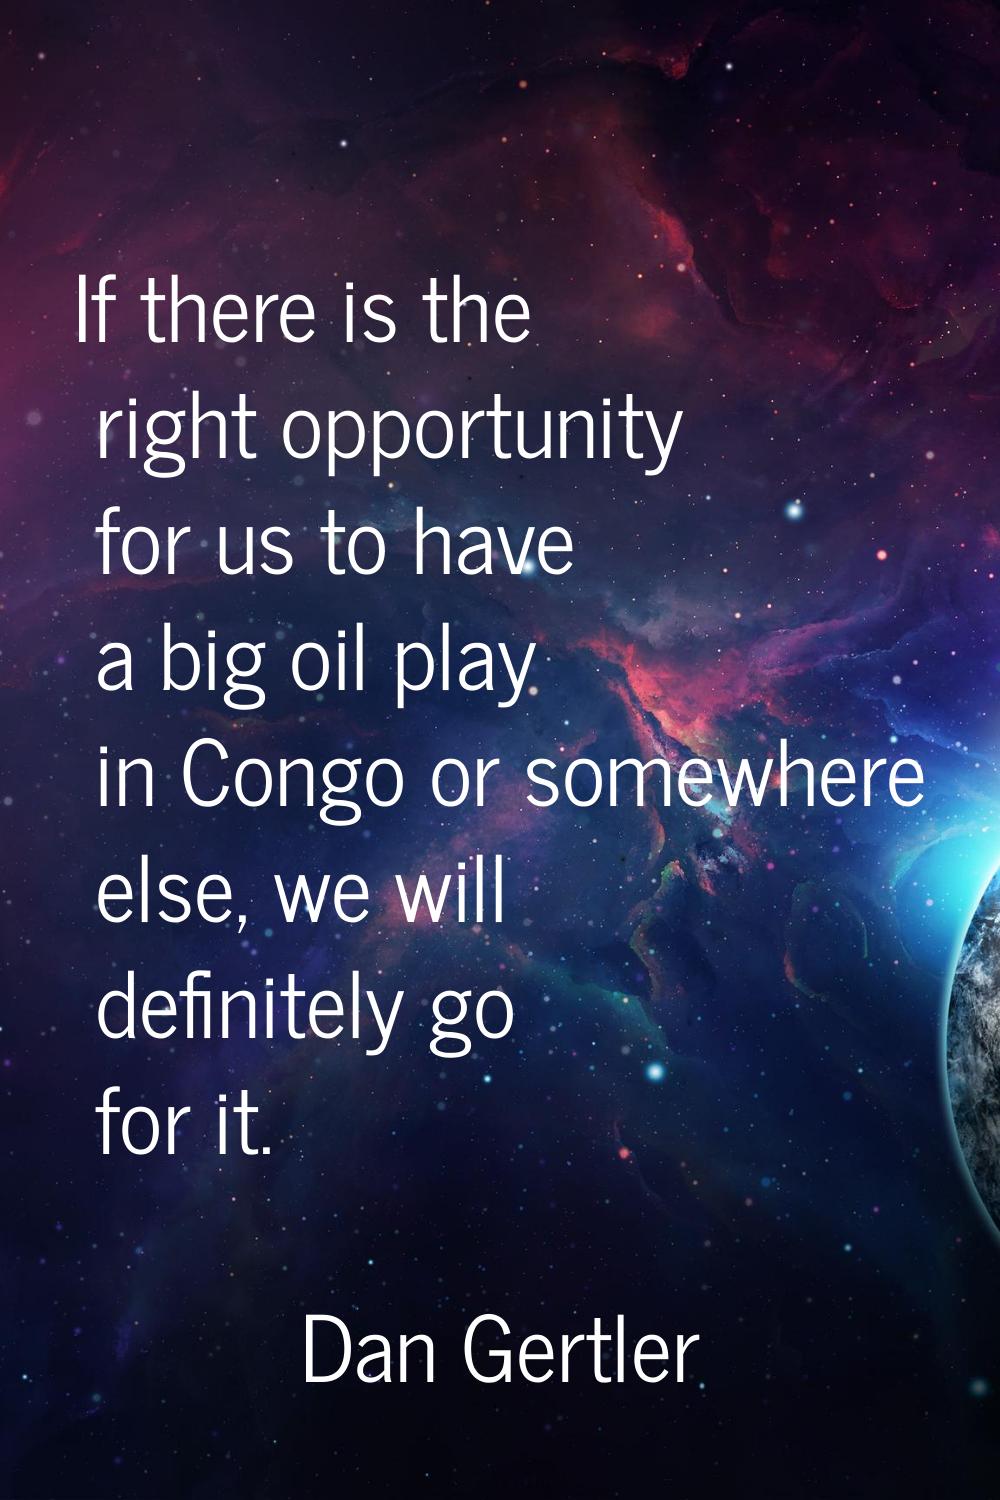 If there is the right opportunity for us to have a big oil play in Congo or somewhere else, we will